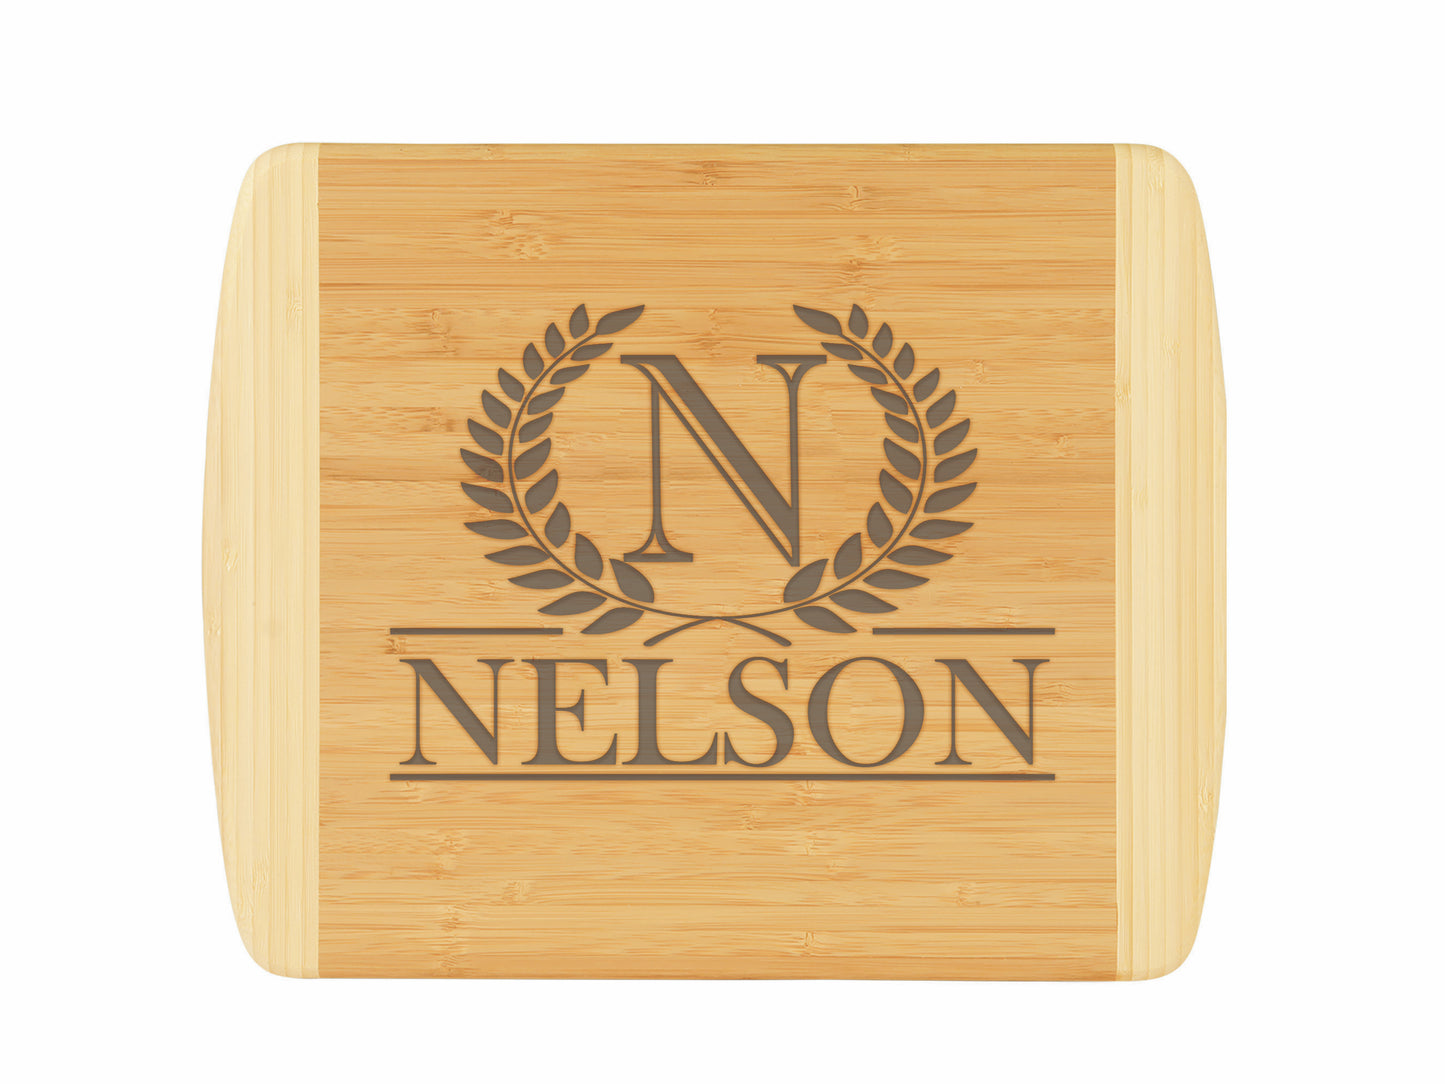 Laurel Wreath Bamboo Cutting Boards | Personalized Family Name Wood Cutting Boards | Different Styles Available